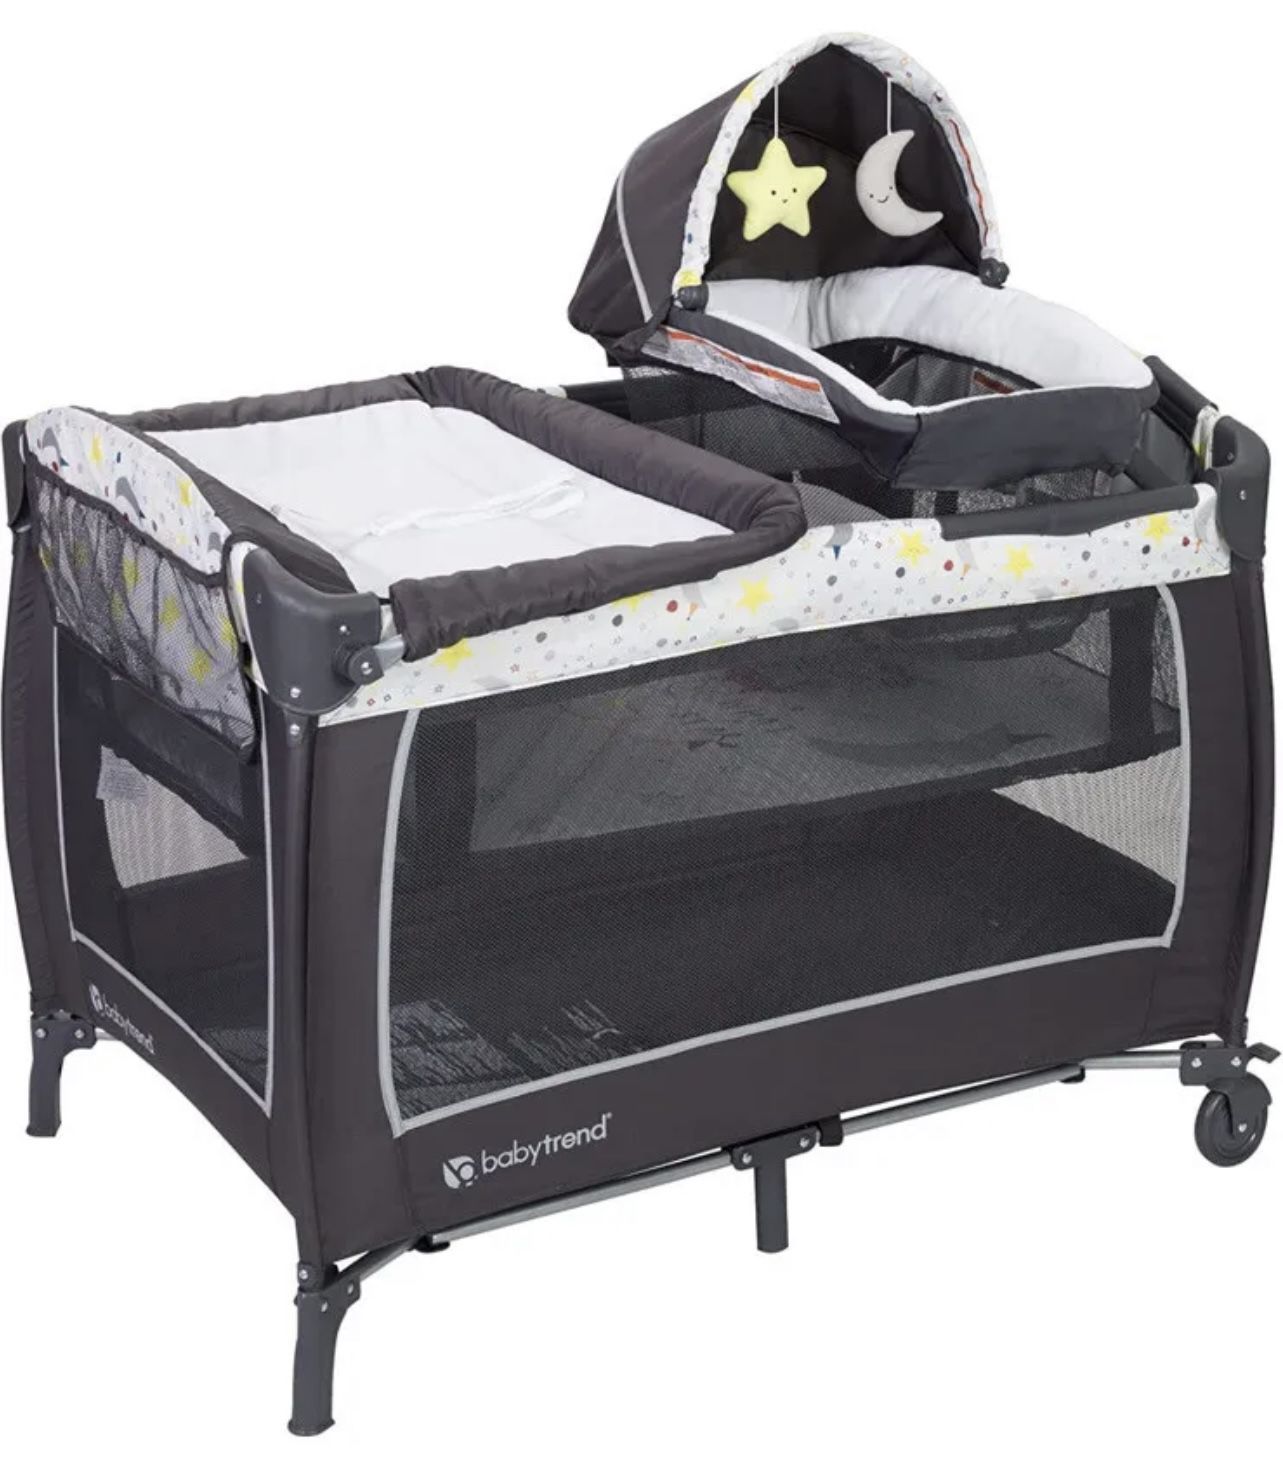 Baby Trend Lil Snooze Deluxe 2 Nursery Center with Changing Table, Twinkle Moon Pack N Play